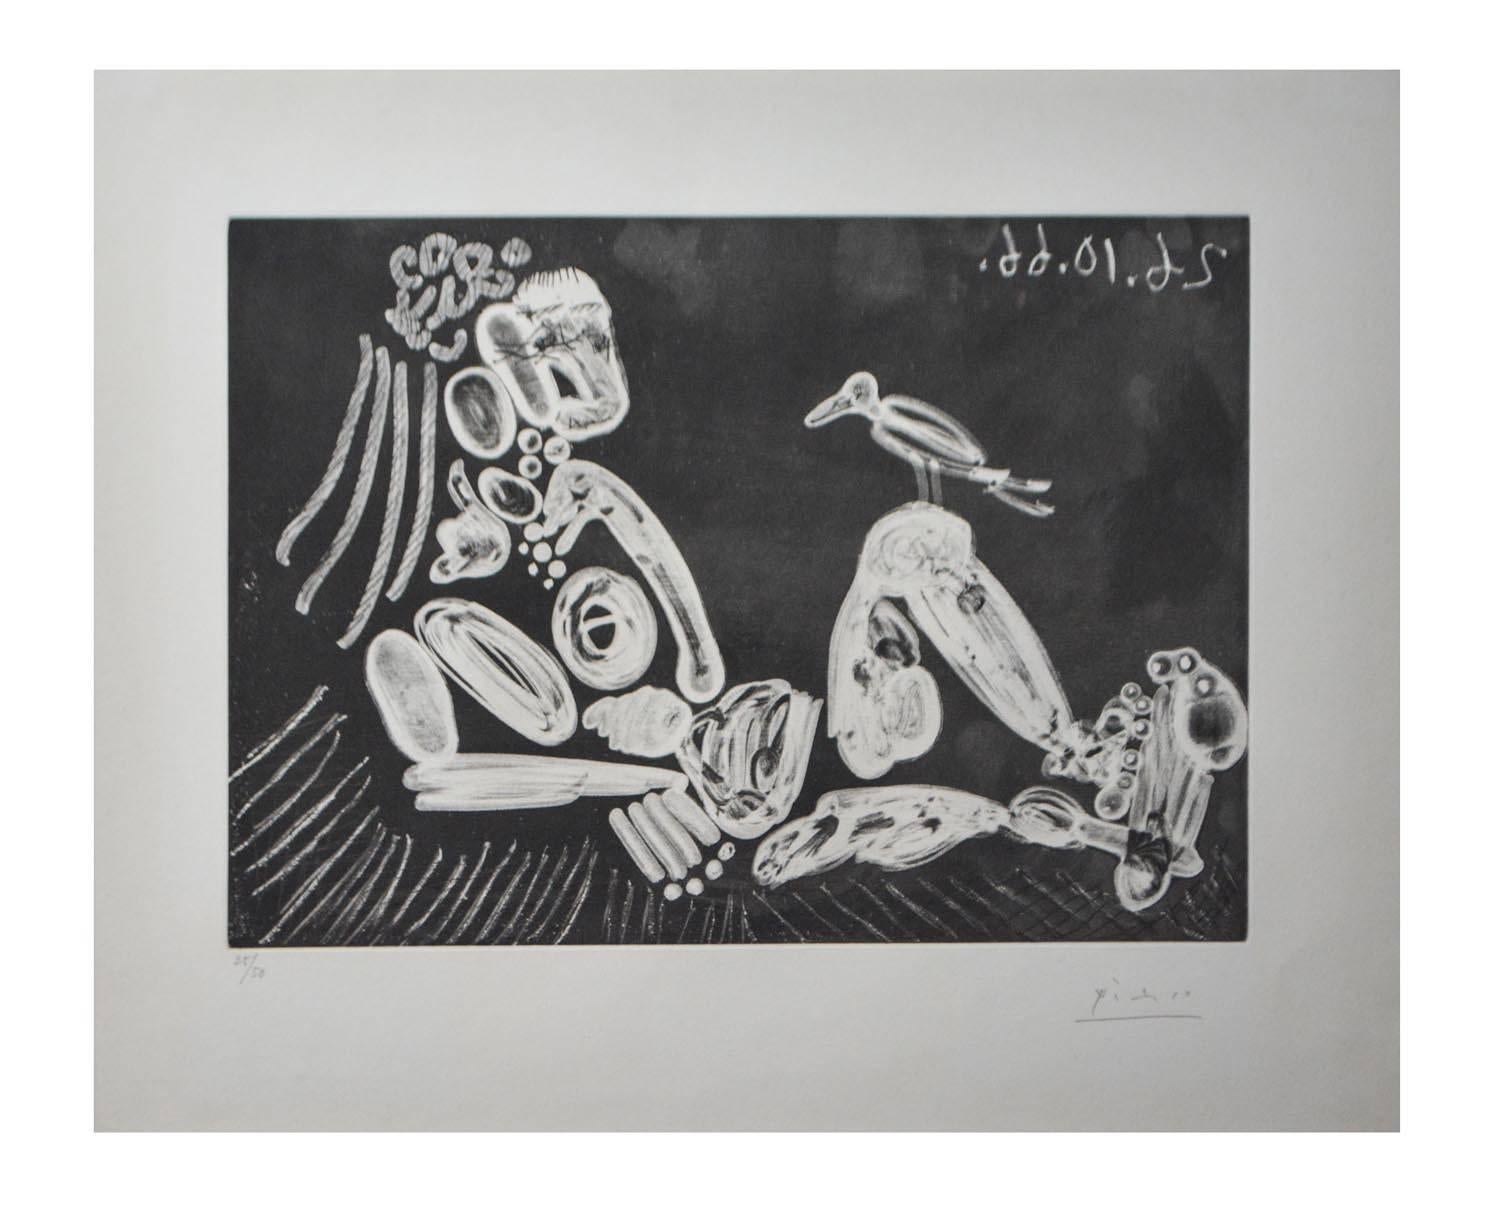 Handsigned Etching and aquatint after an original pastel by Pablo Picasso
1966
Rare Edition of 50
Dimensions: 41.6 x 50.2 cm
Excellent condition, with full margins
Reference: Bloch 1391

Pablo Picasso

Picasso is not just a man and his work. Picasso